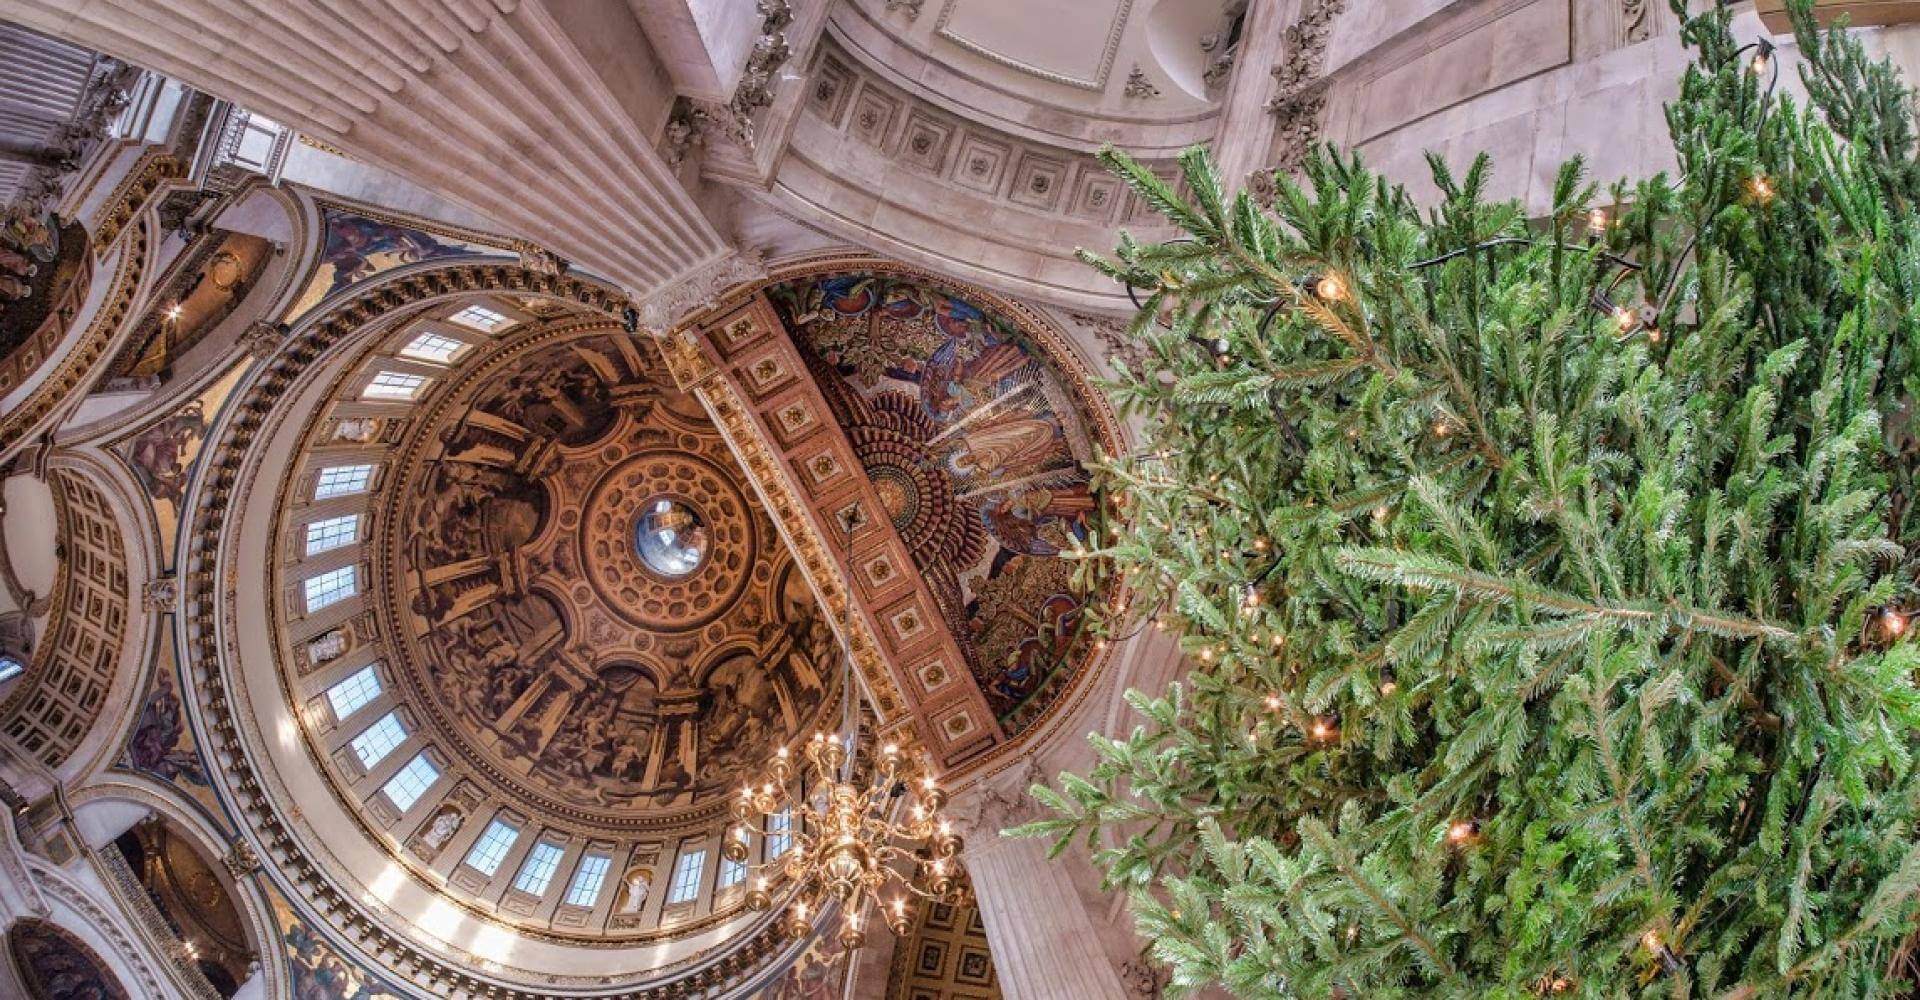 A view looking directly up at the Cathedral Dome with Christmas tree